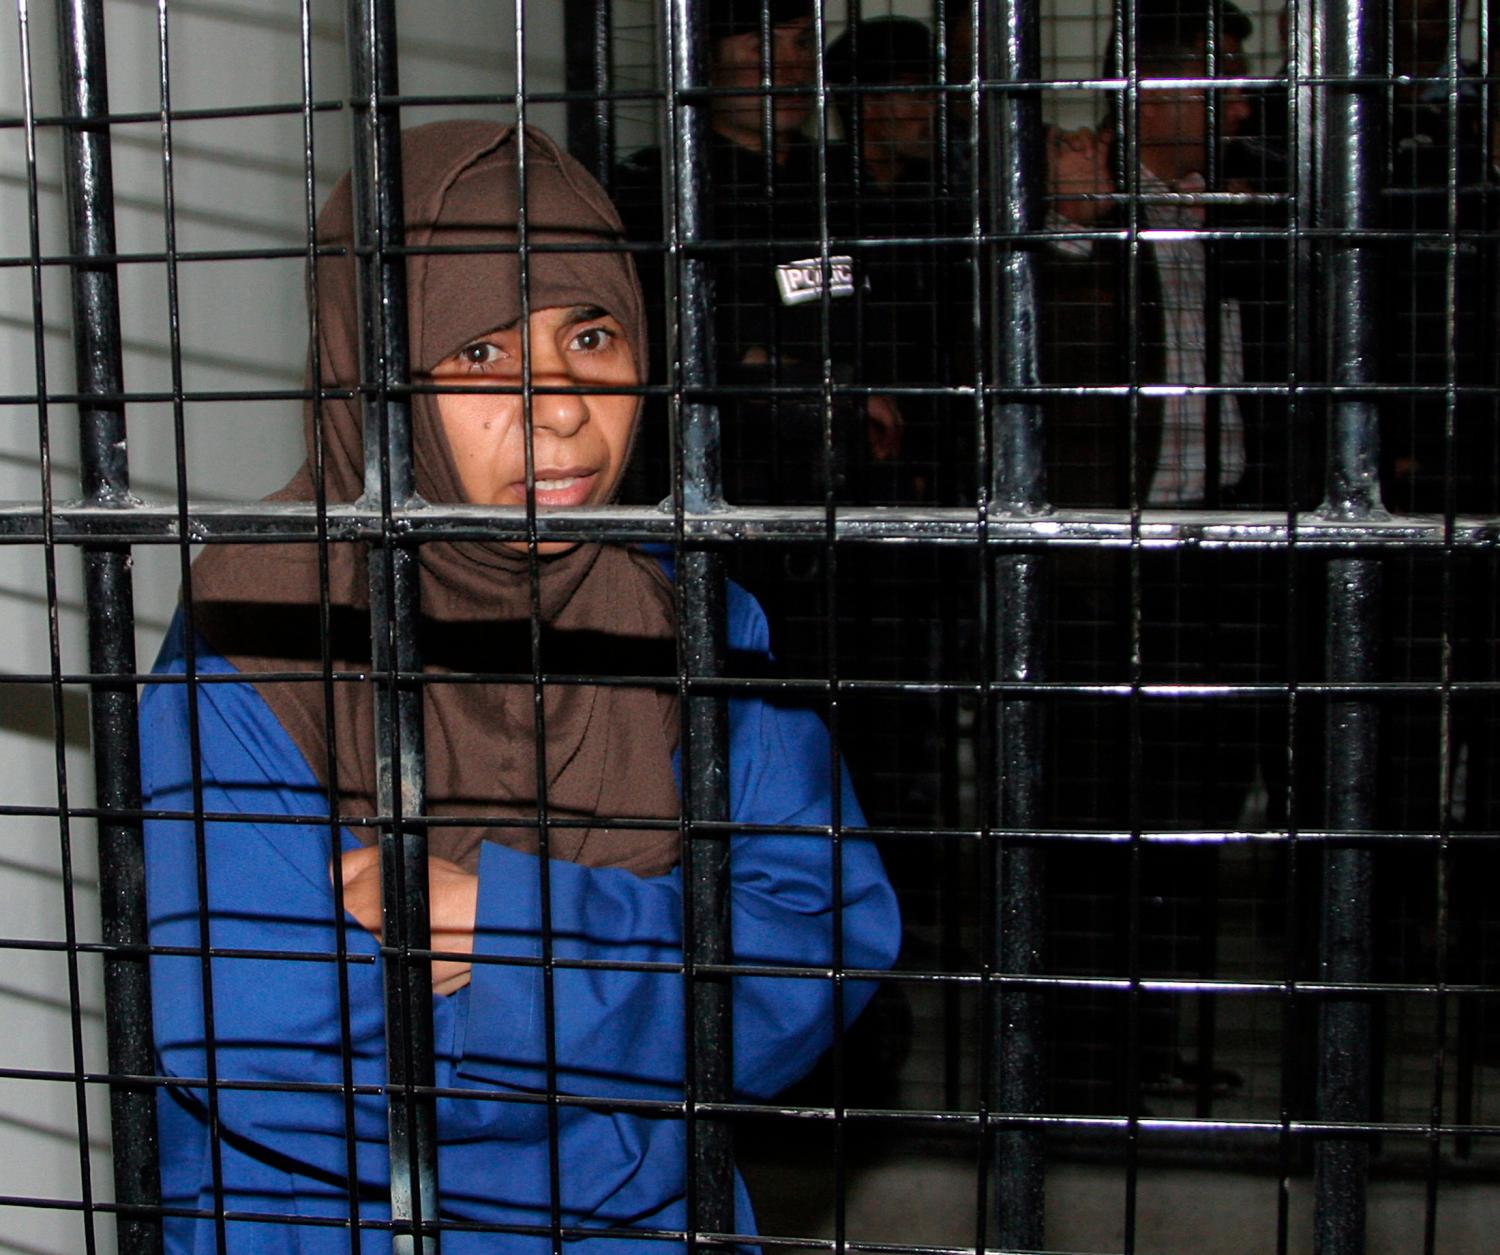 Iraqi Sajida al-Rishawi, 35, stands inside a military court at Juwaida prison in Amman April 24, 2006. Sajida will stand trial on Monday in a state security court for the attacks on three Amman hotels on November 9 by her husband and two other male Iraqi suicide bombers. Rishawi has been charged with conspiracy to carry out terrorist acts, causing death and destruction, and the illegal possession of weapons and explosives, and faces a death sentence if found guilty.